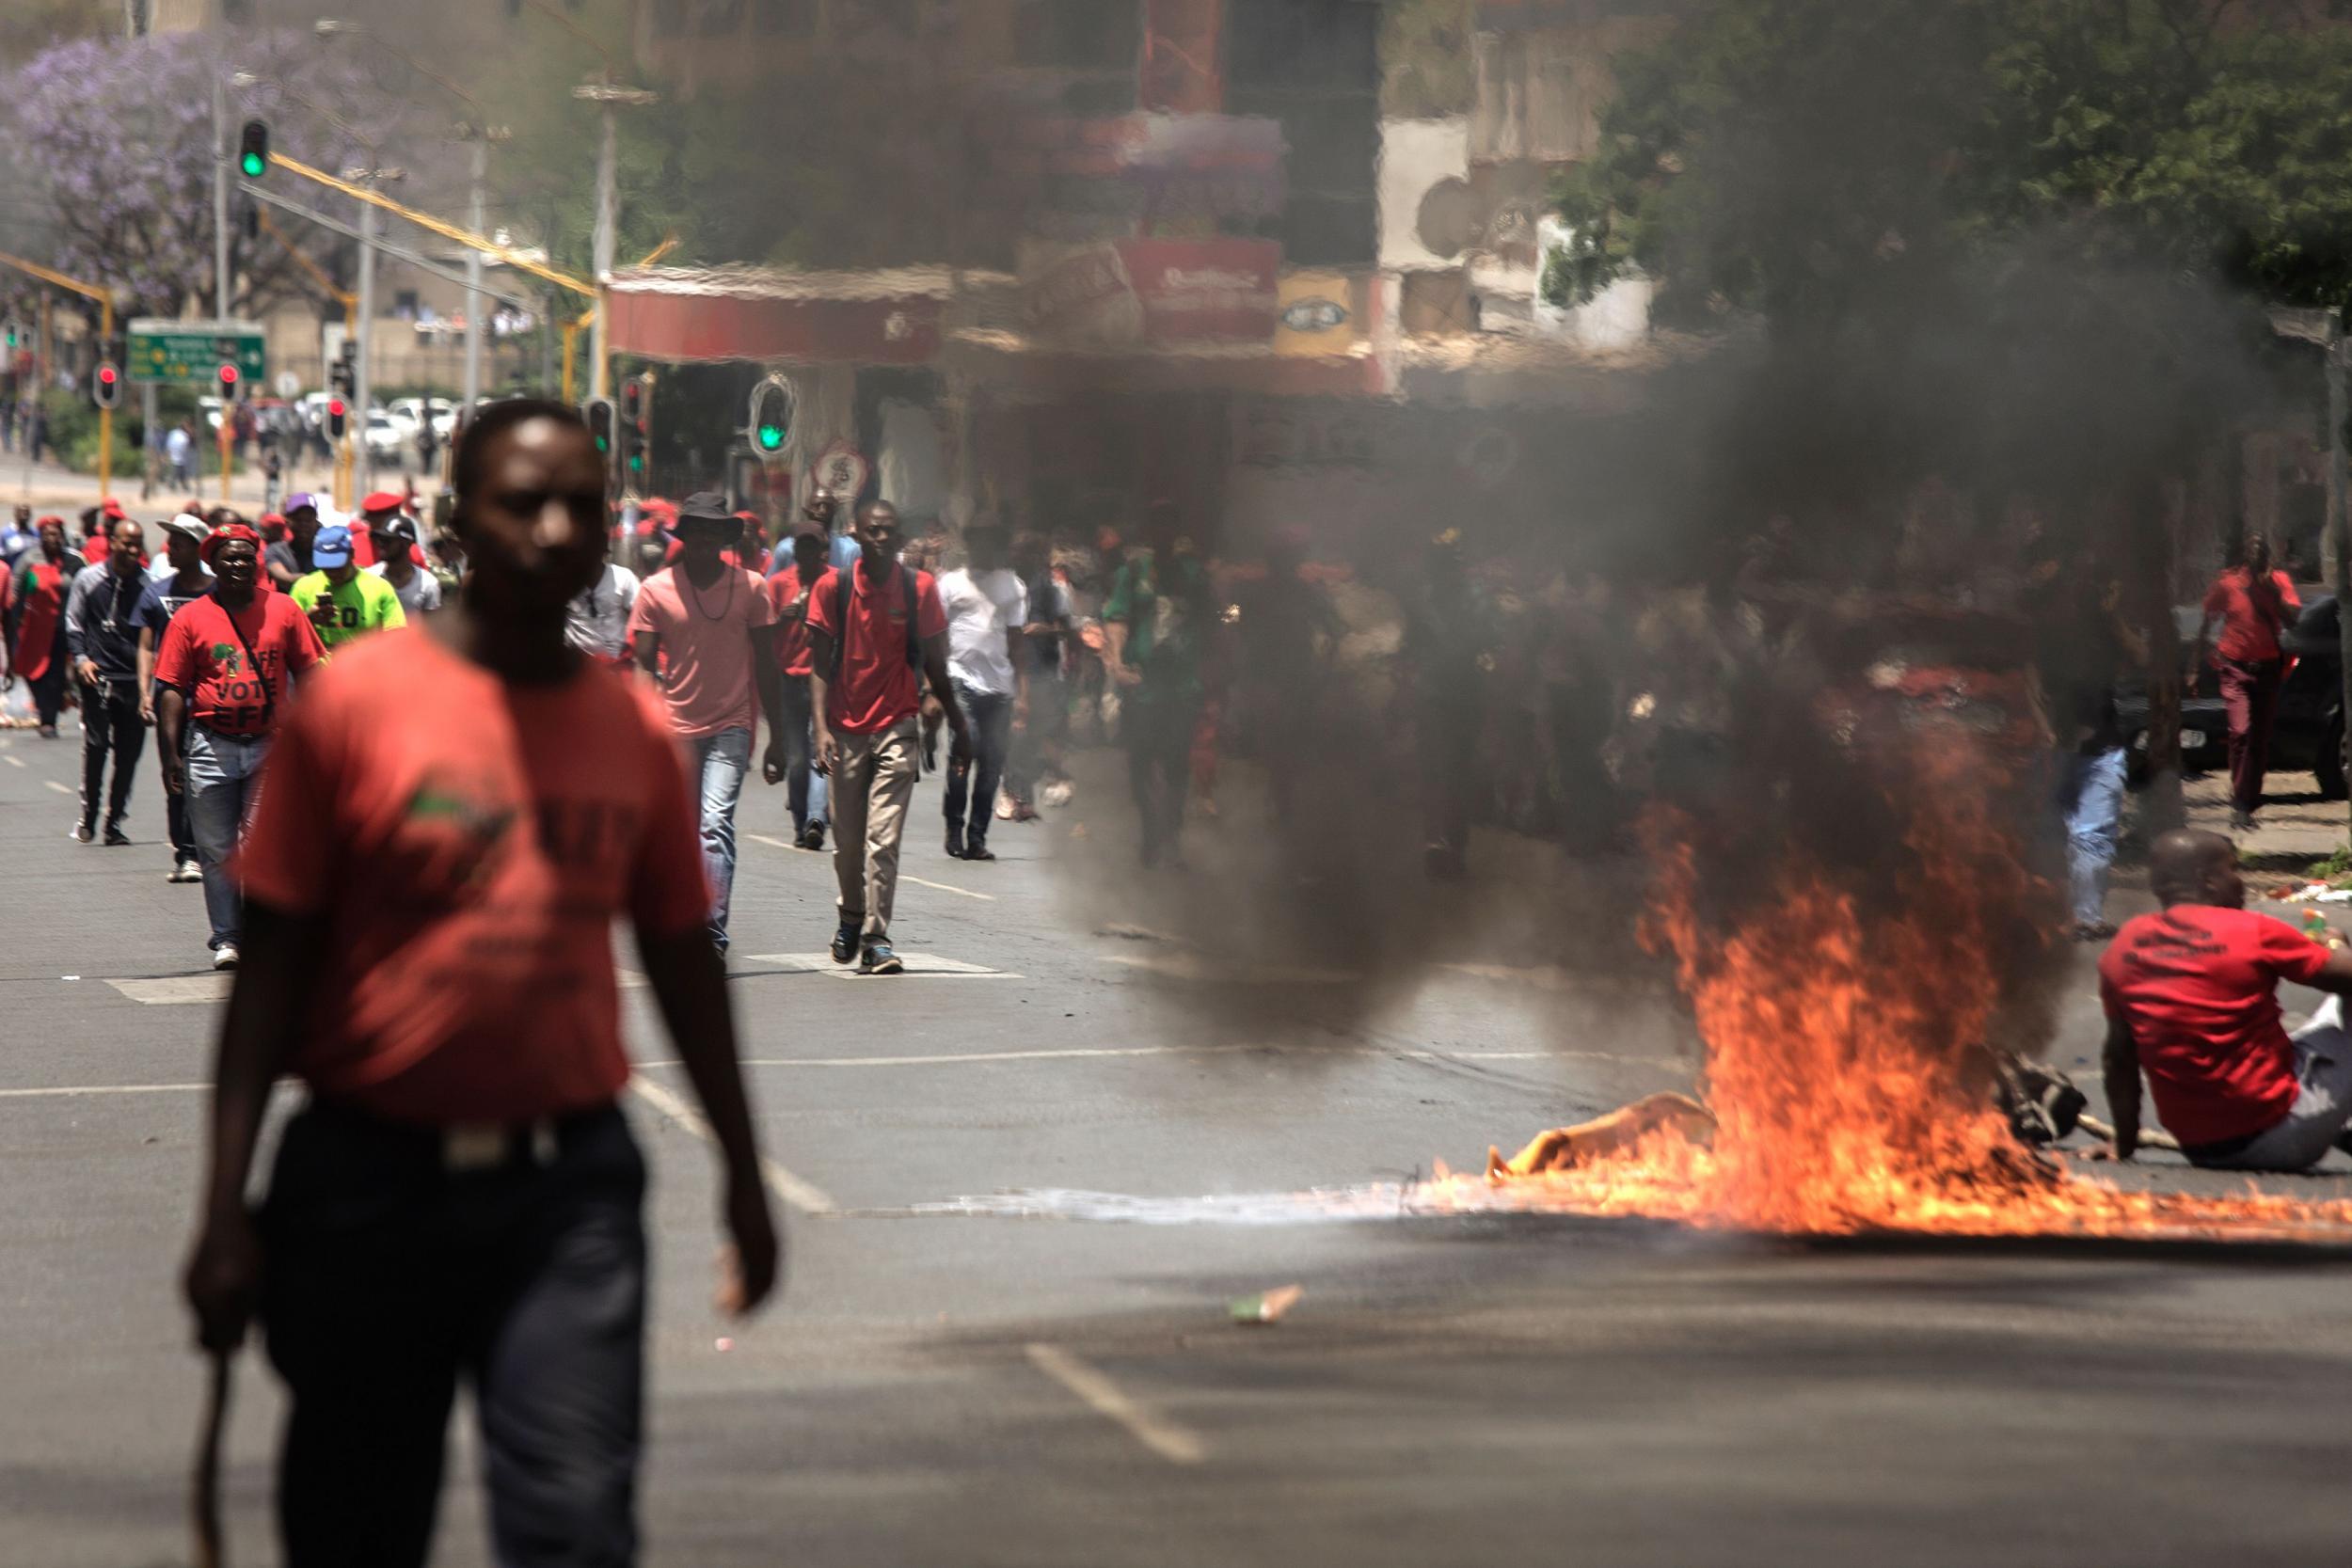 Opposition party supporters protest against President Zuma in Pretoria on Wednesday